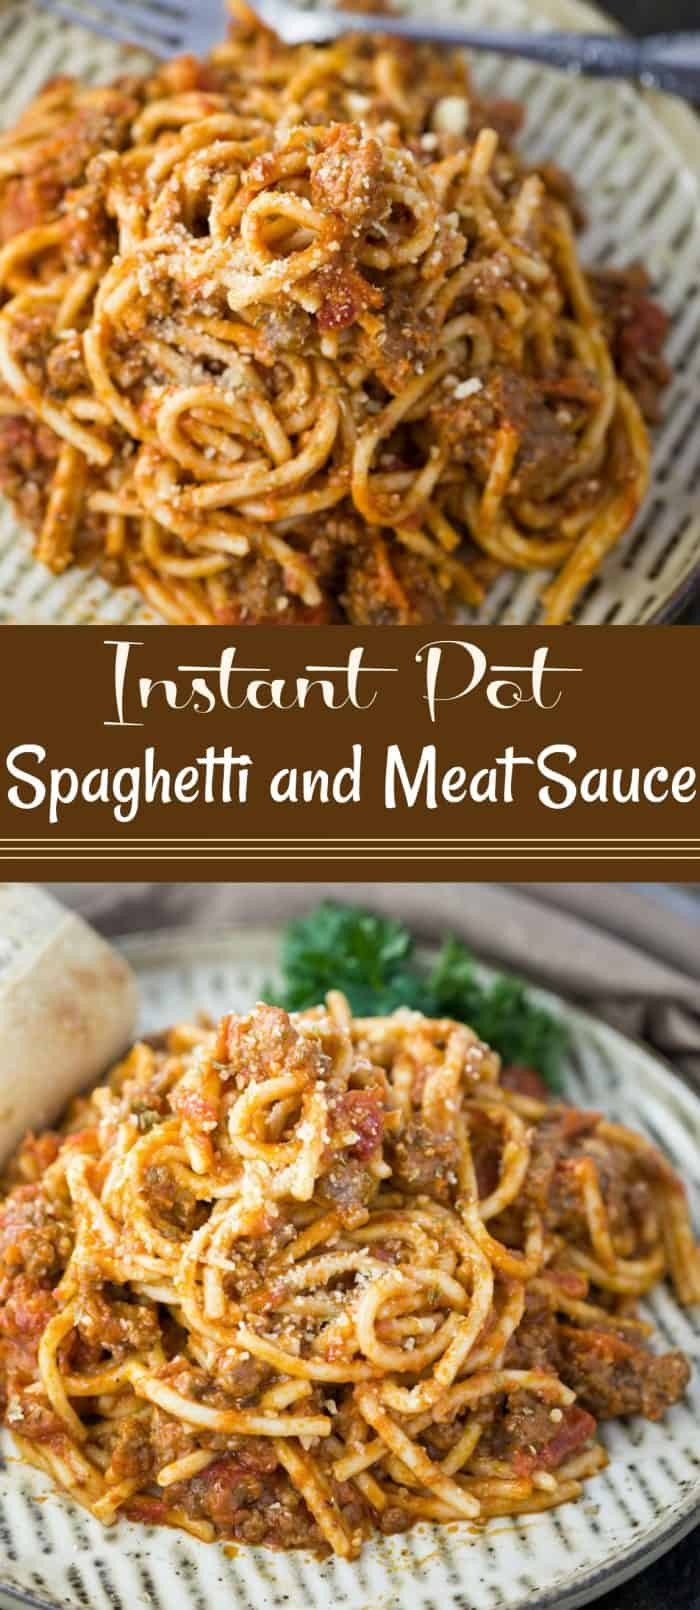 Instant Pot Spaghetti Meat Sauce
 Instant Pot Spaghetti and Meat Sauce The Cozy Cook